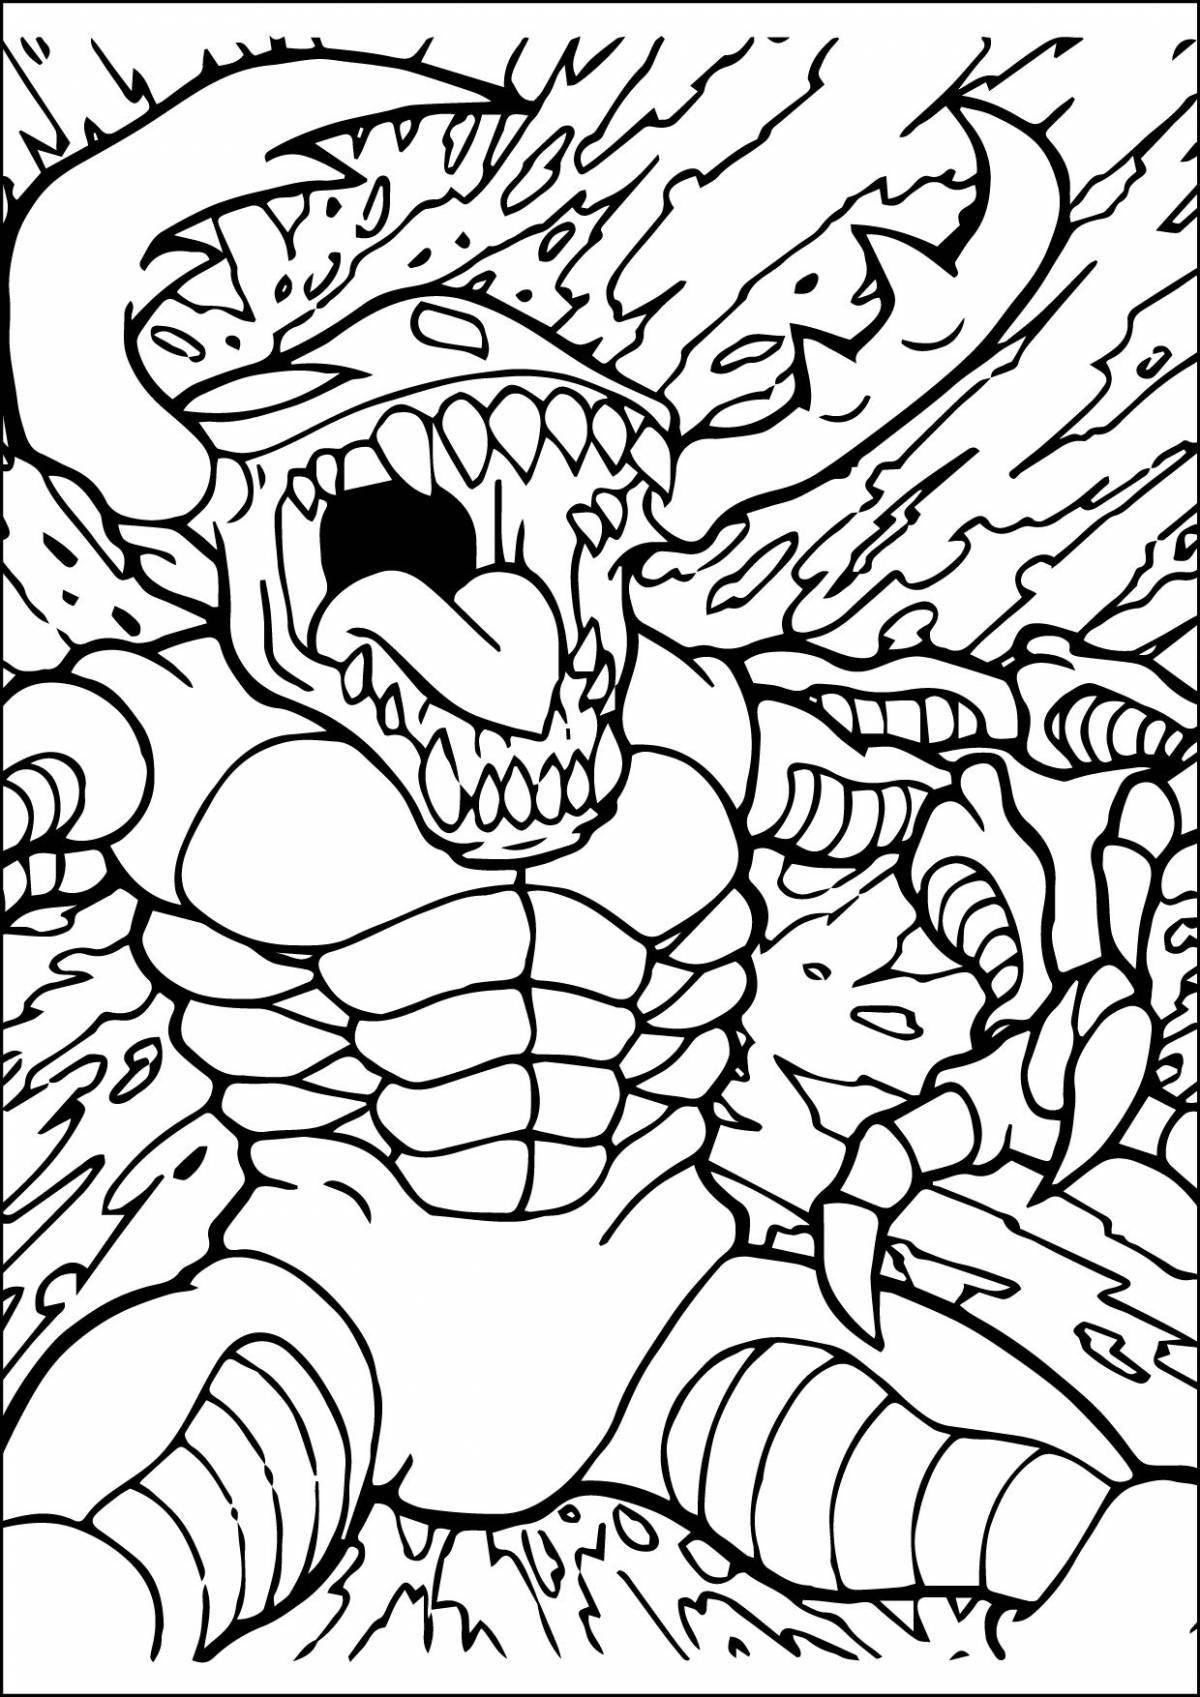 Great maxi monsters coloring book